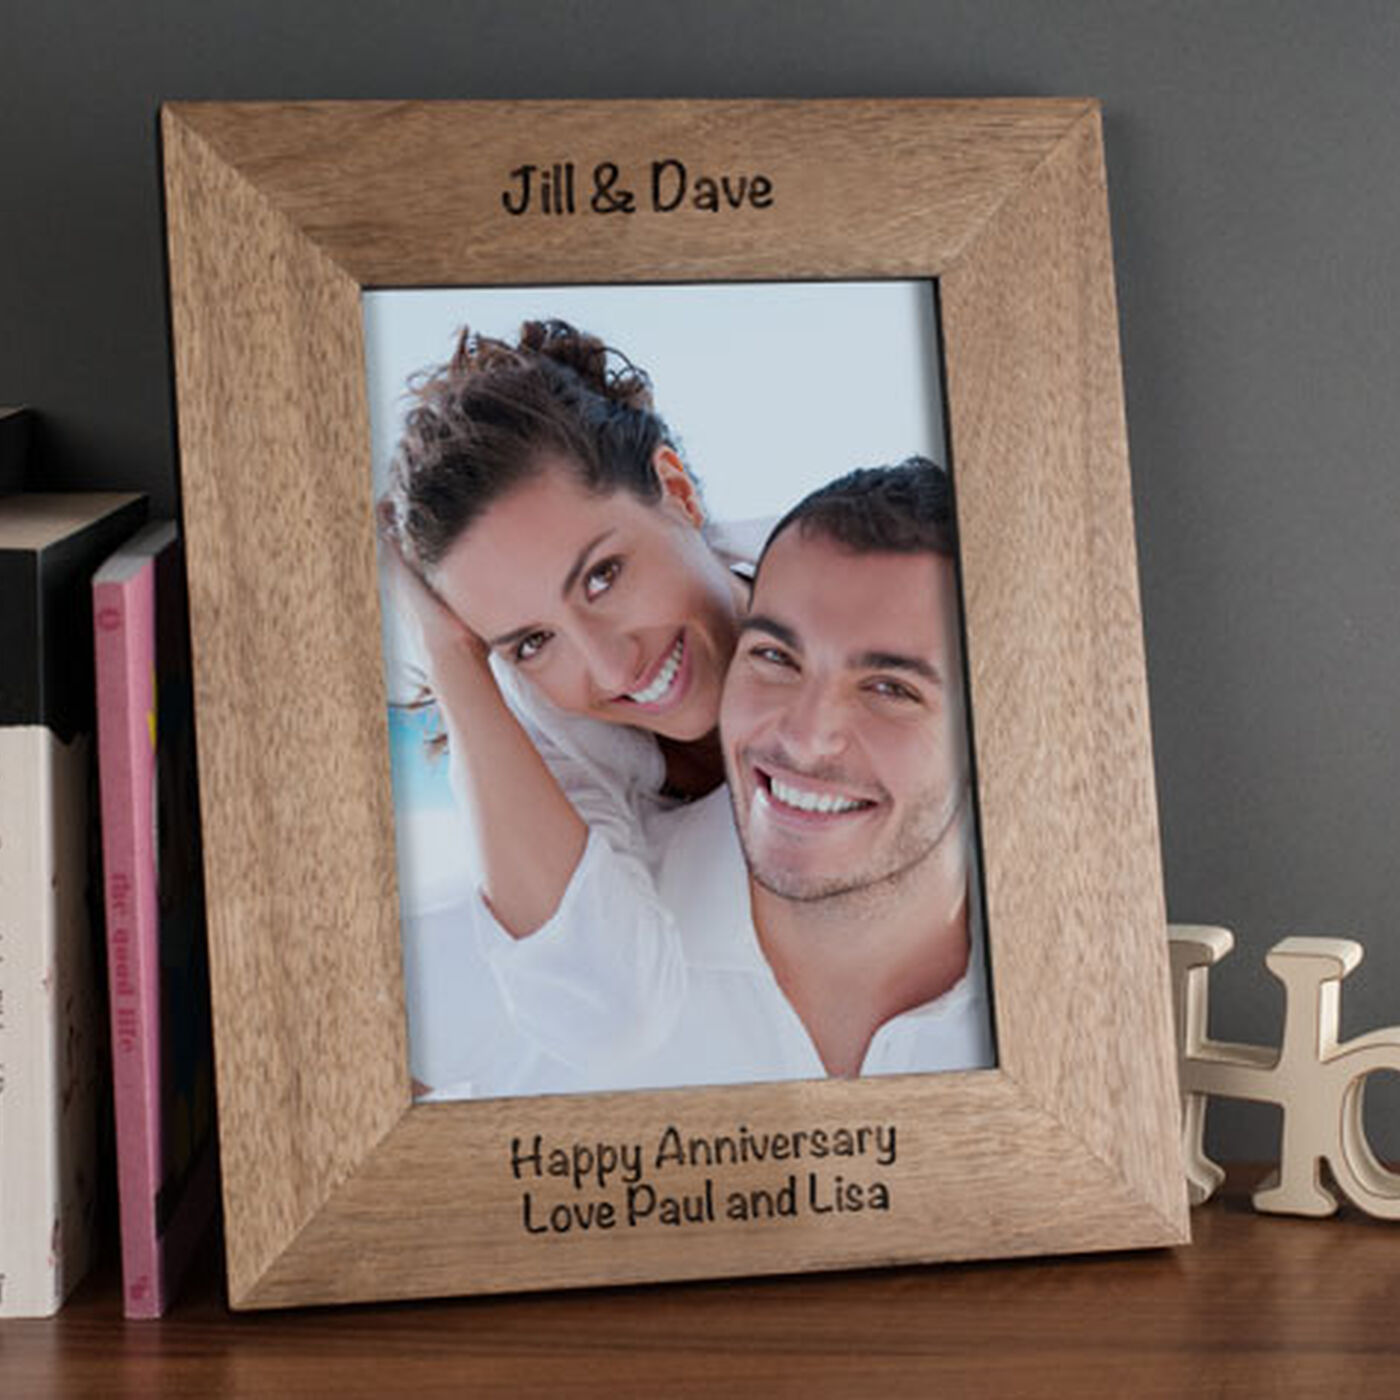 Personalised Wooden Photo Frame - Portrait Photo - Mother's Day